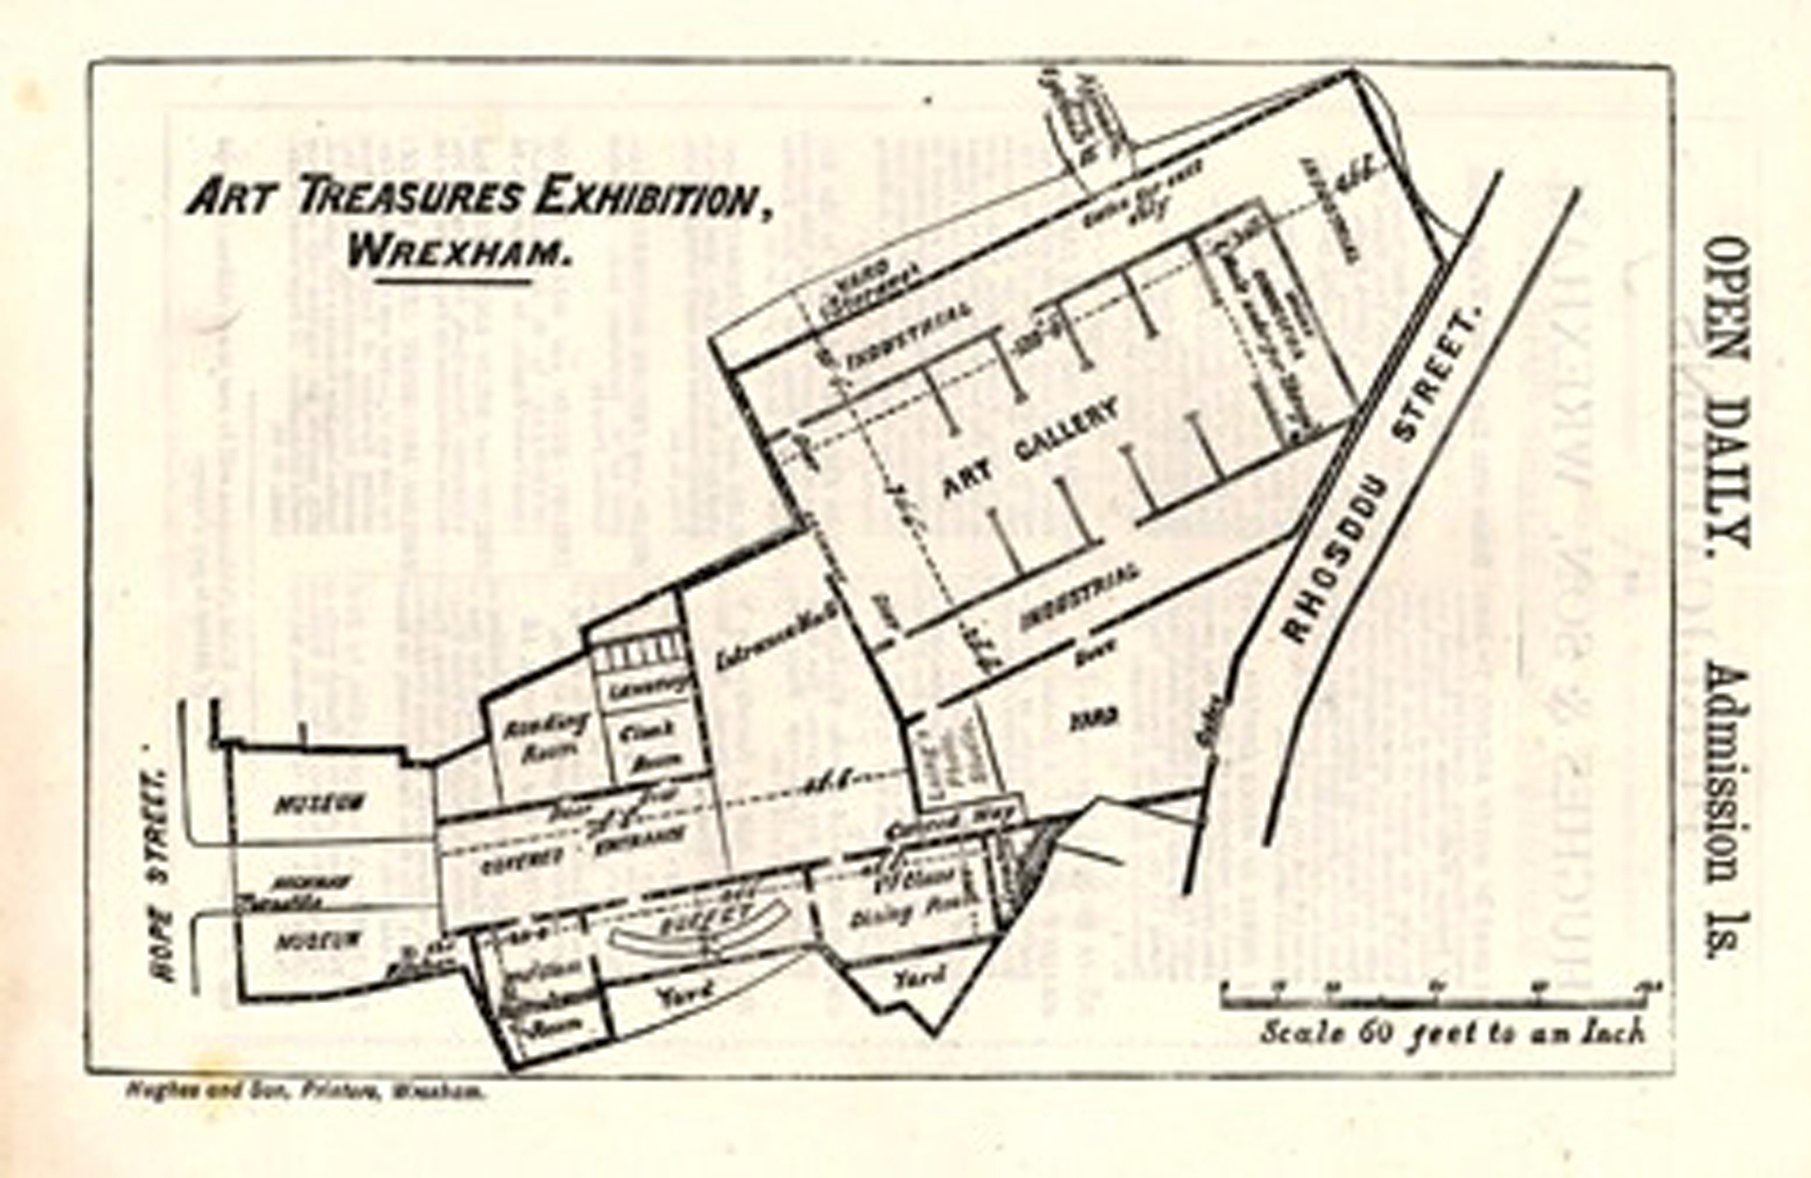 Plan of the Art Treasures Exhibition building, part of the Great Exhibition in Wrexham 1876. Image courtesy of Phil Phillips